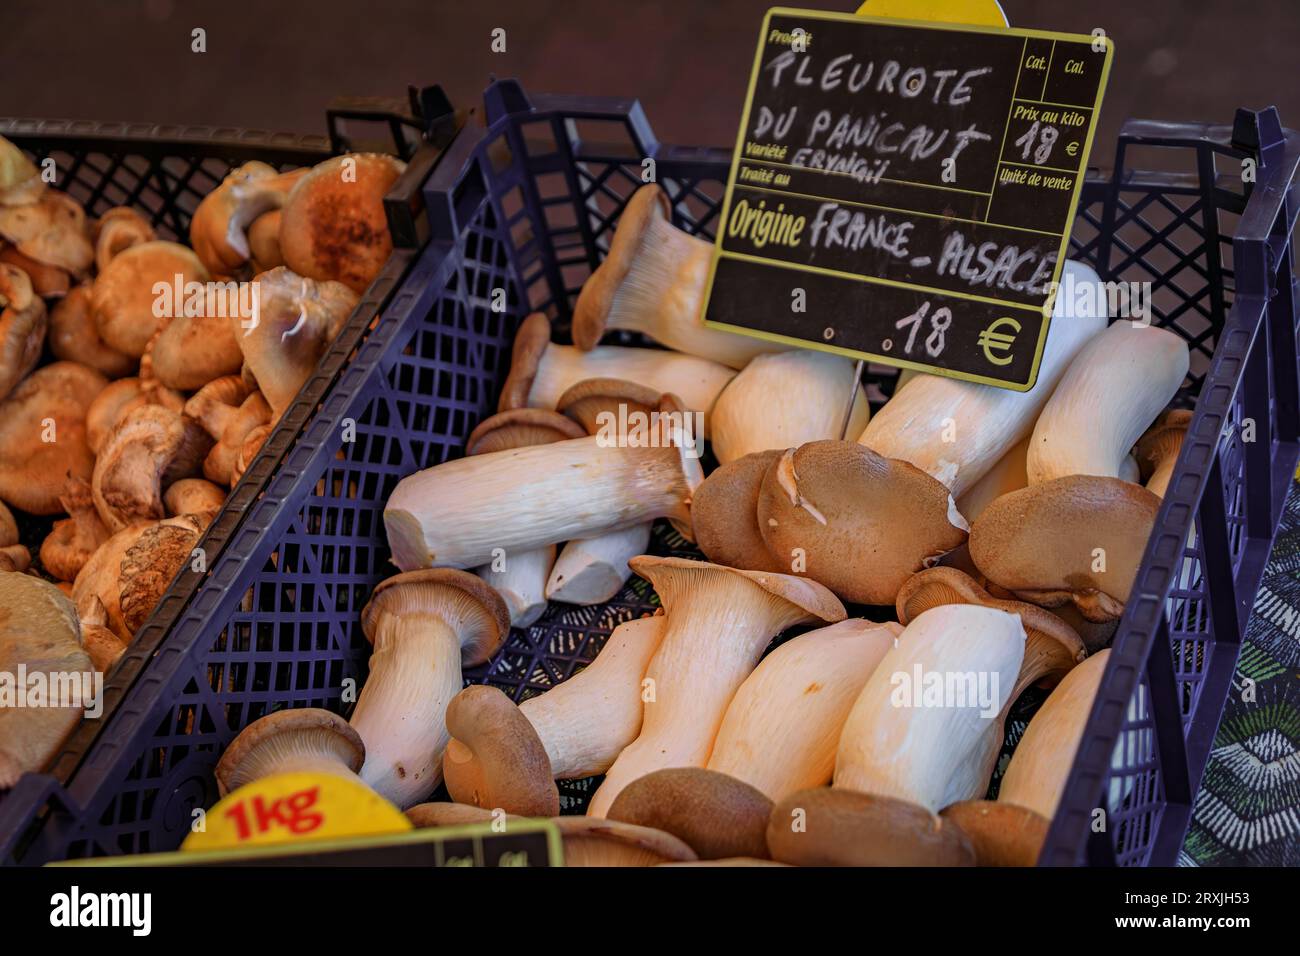 King trumpet mushrooms on display at a farmers market on Place Broglie Square in the historic center of Strasbourg, Alsace, France Stock Photo